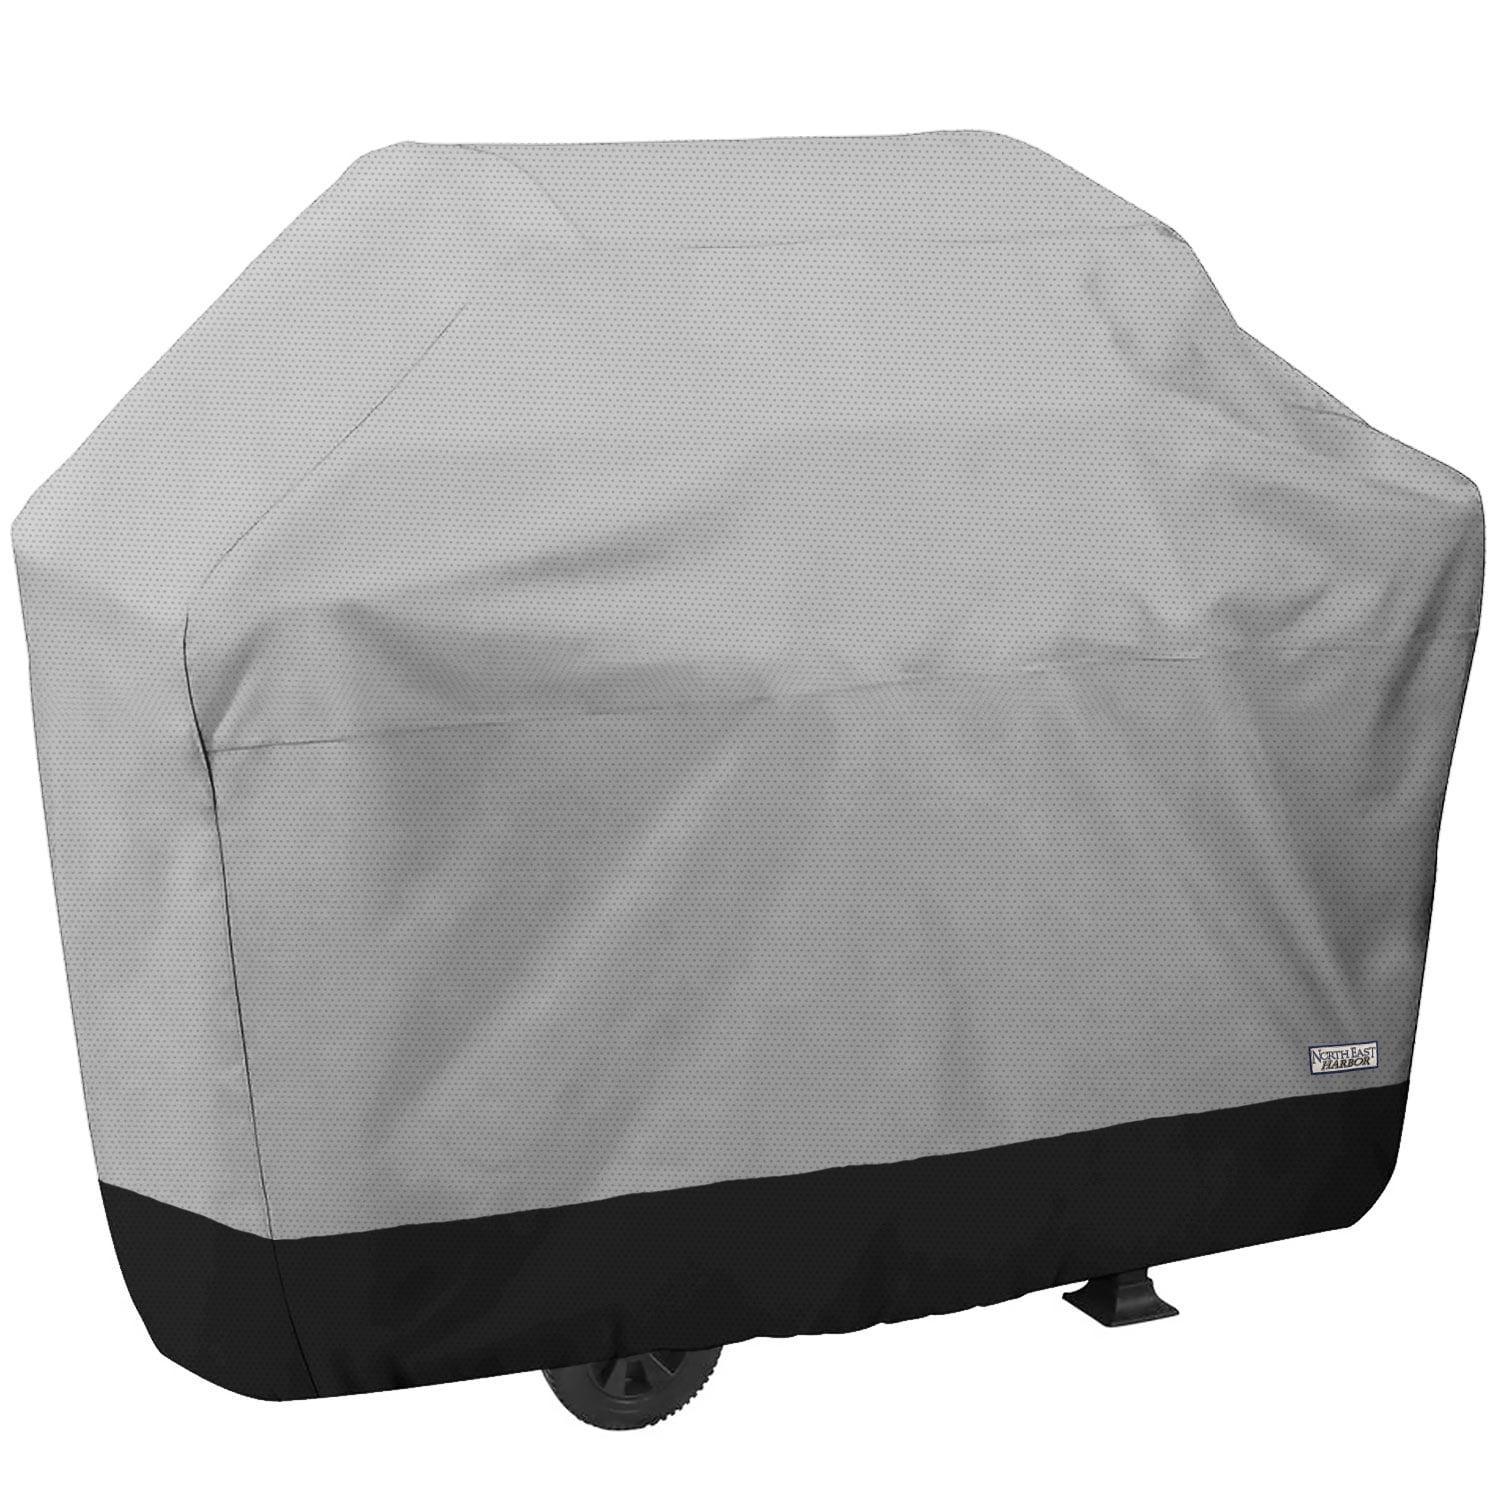 Mainstays Sandell Large Outdoor Cart Grill Cover in Gray 64" 